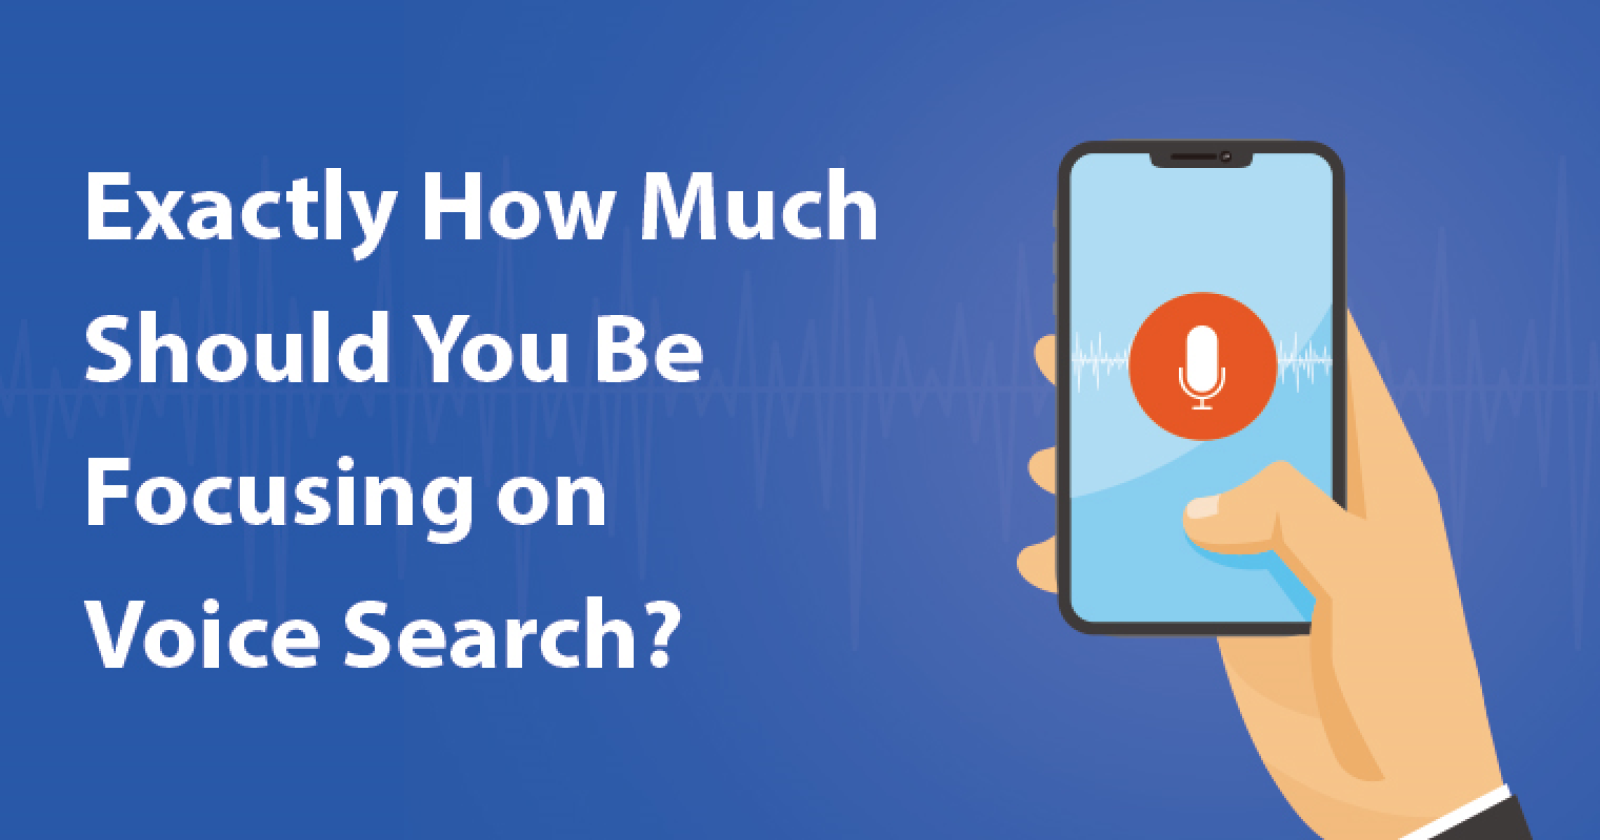 Exactly-How-Much-Should-You-Be-Focusing-on-Voice-Search